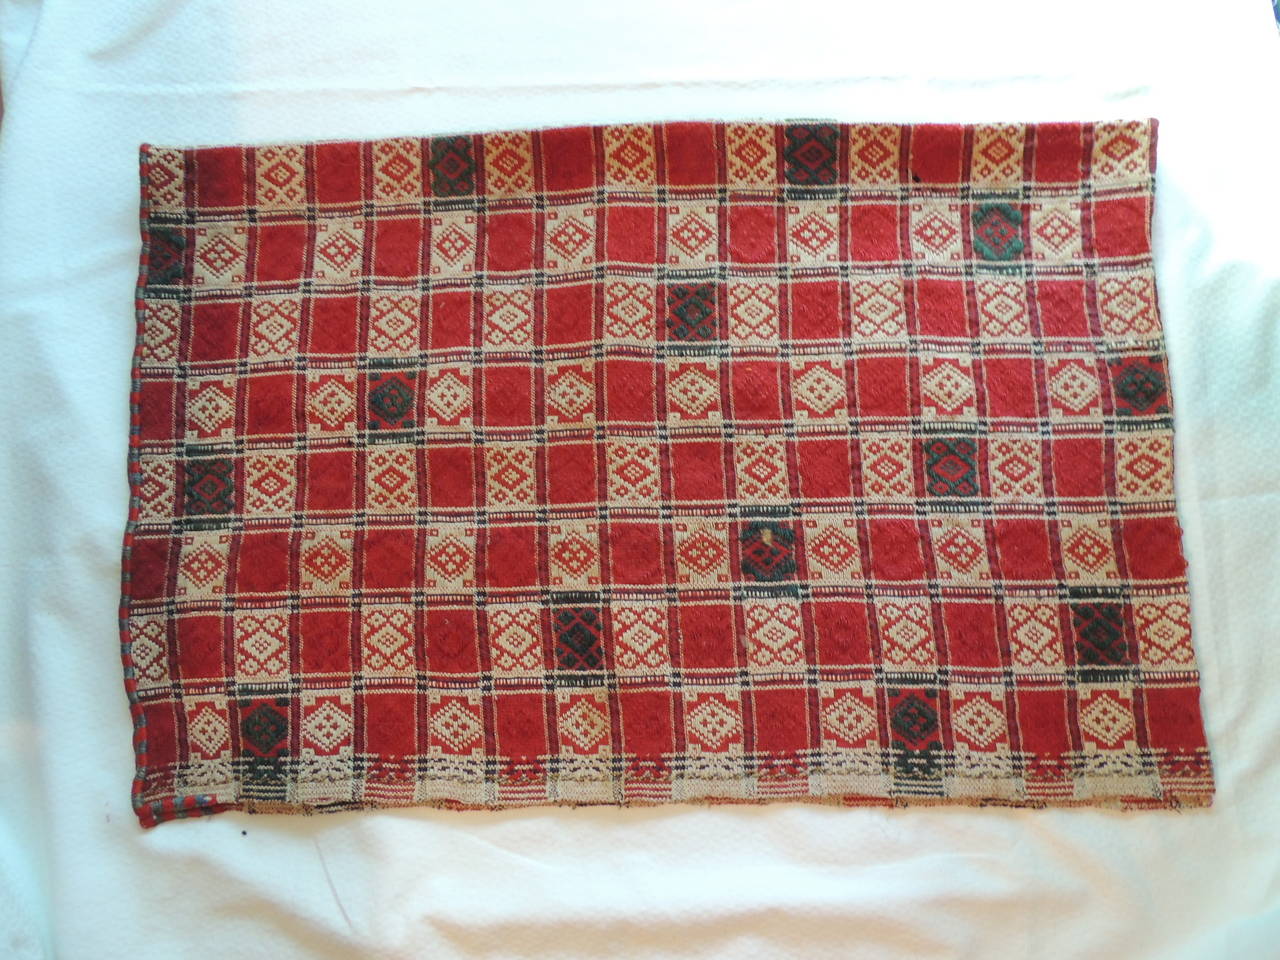 Anatolian checkerboard antique textile in shades or red, natural and green, each square is hand-knotted to create the large piece, basket weave pattern textured linen.